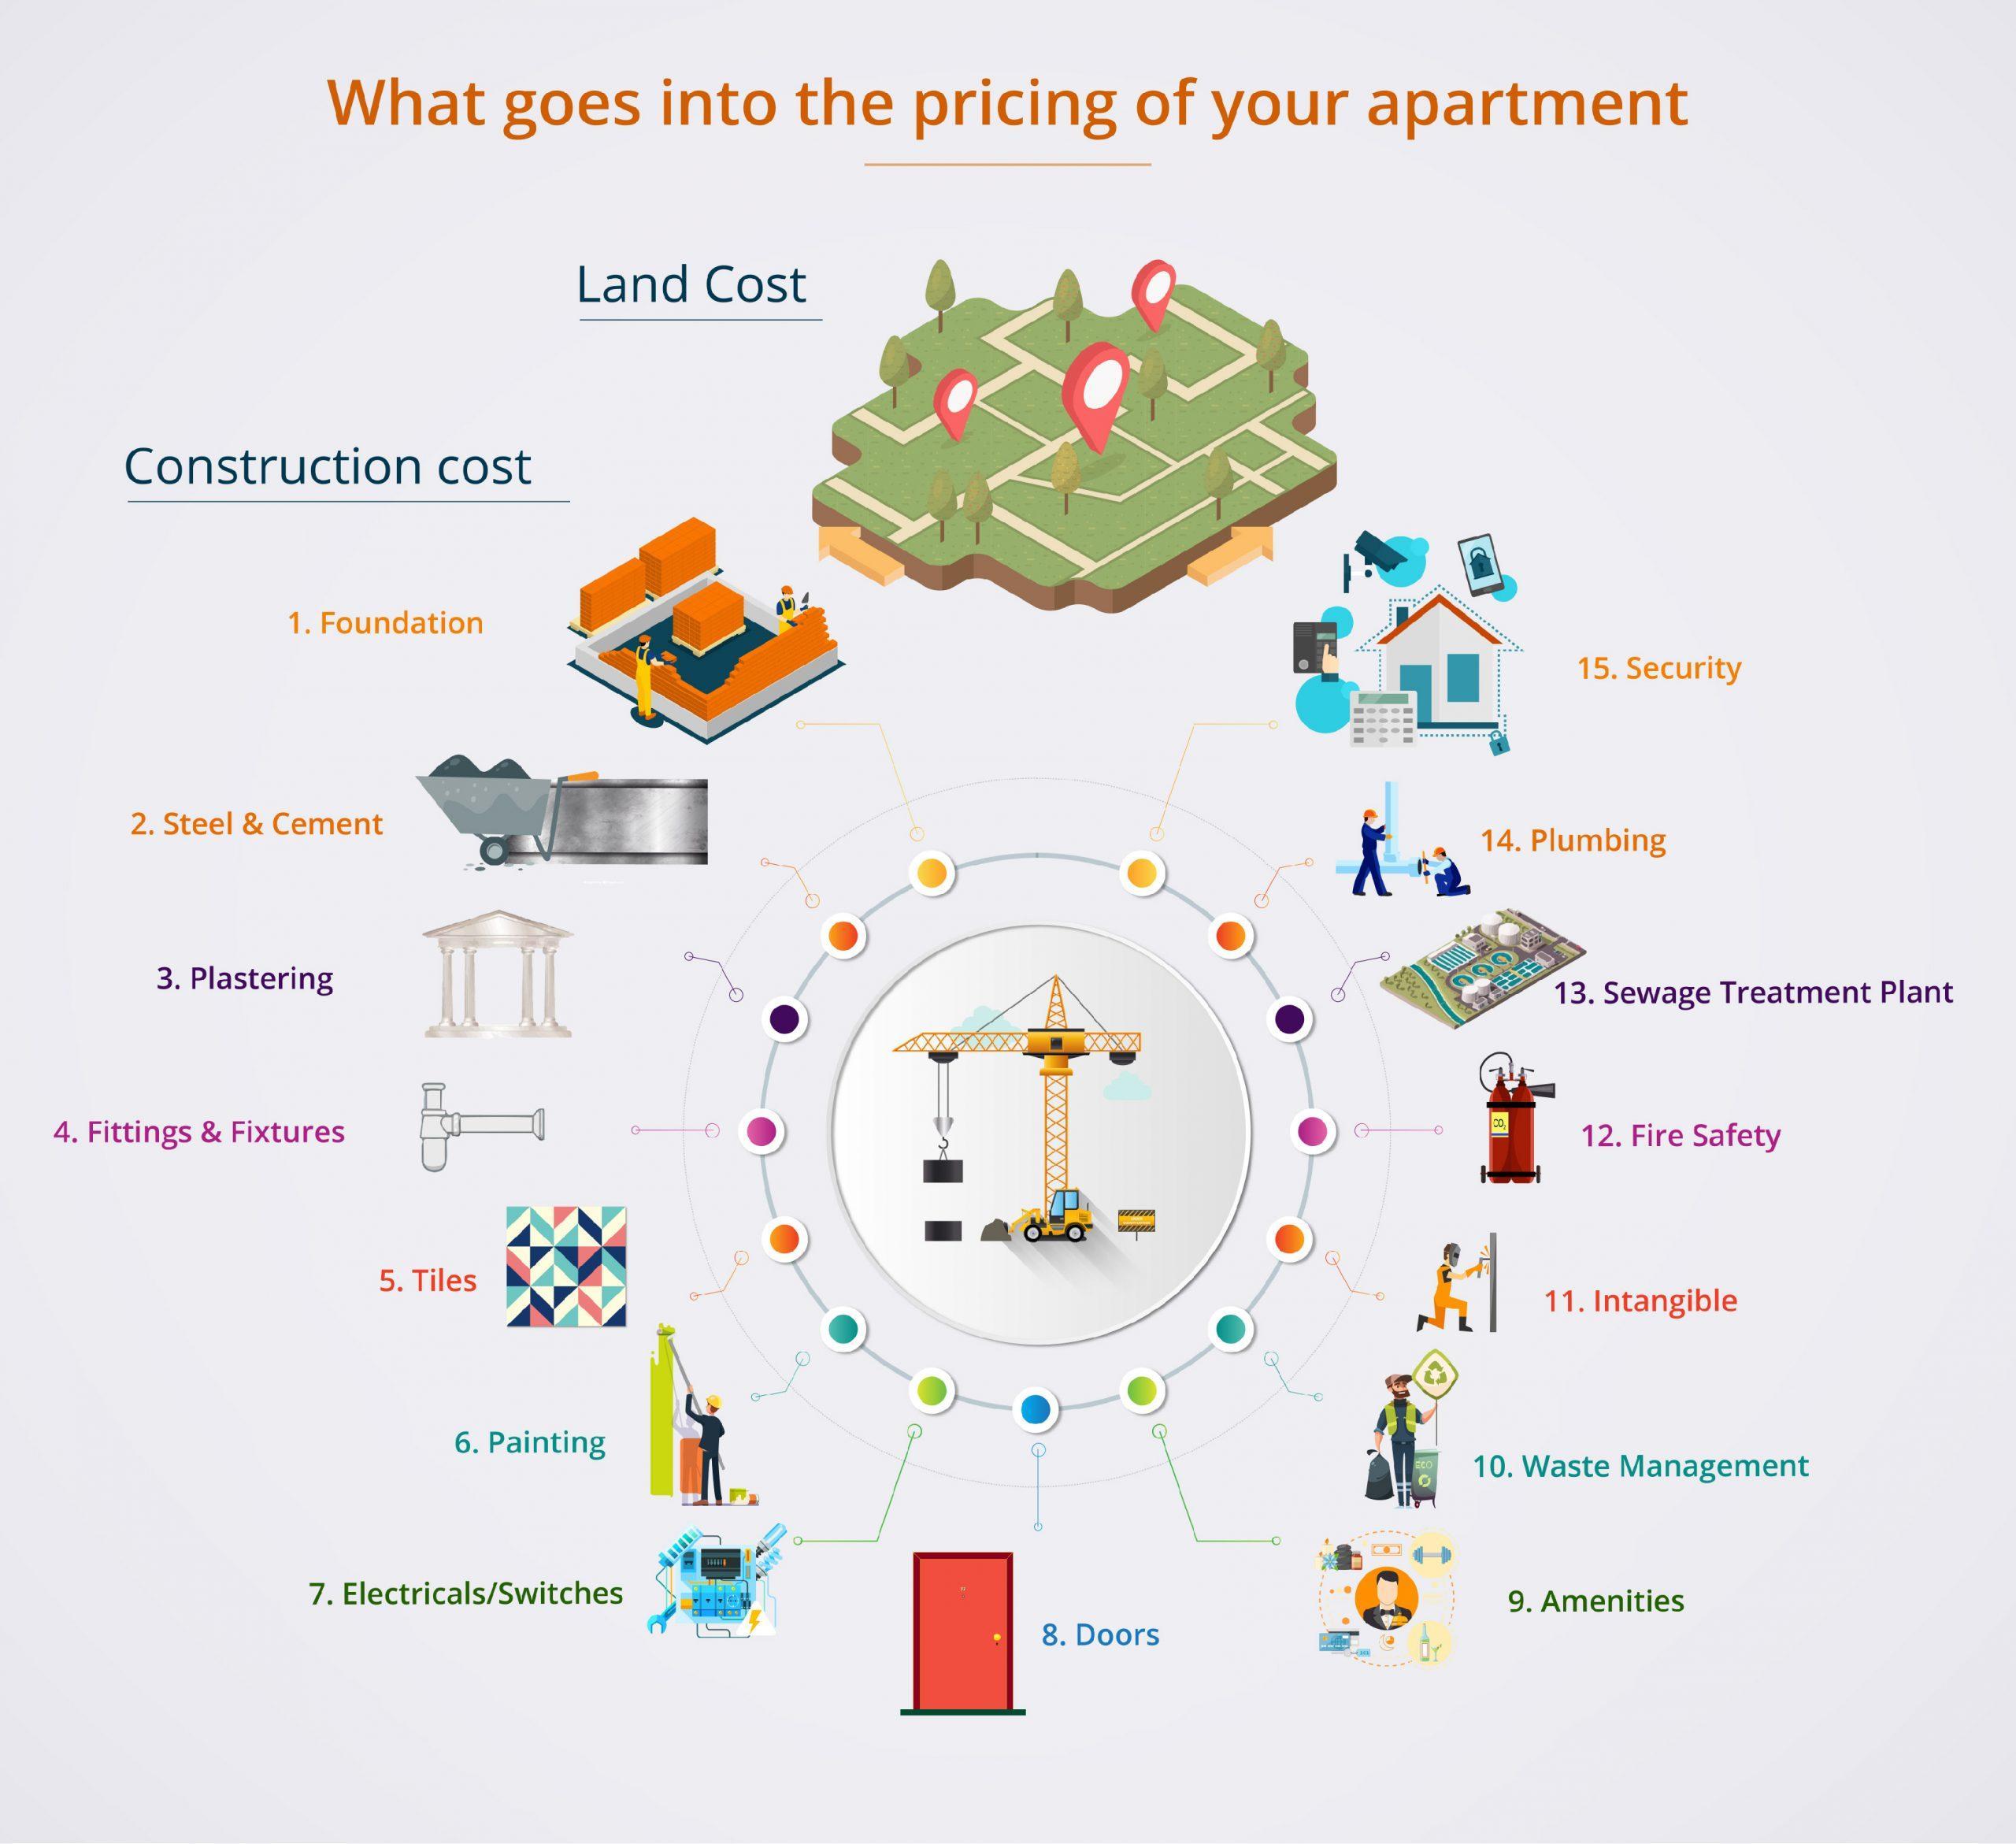 What goes into the pricing of your apartment?